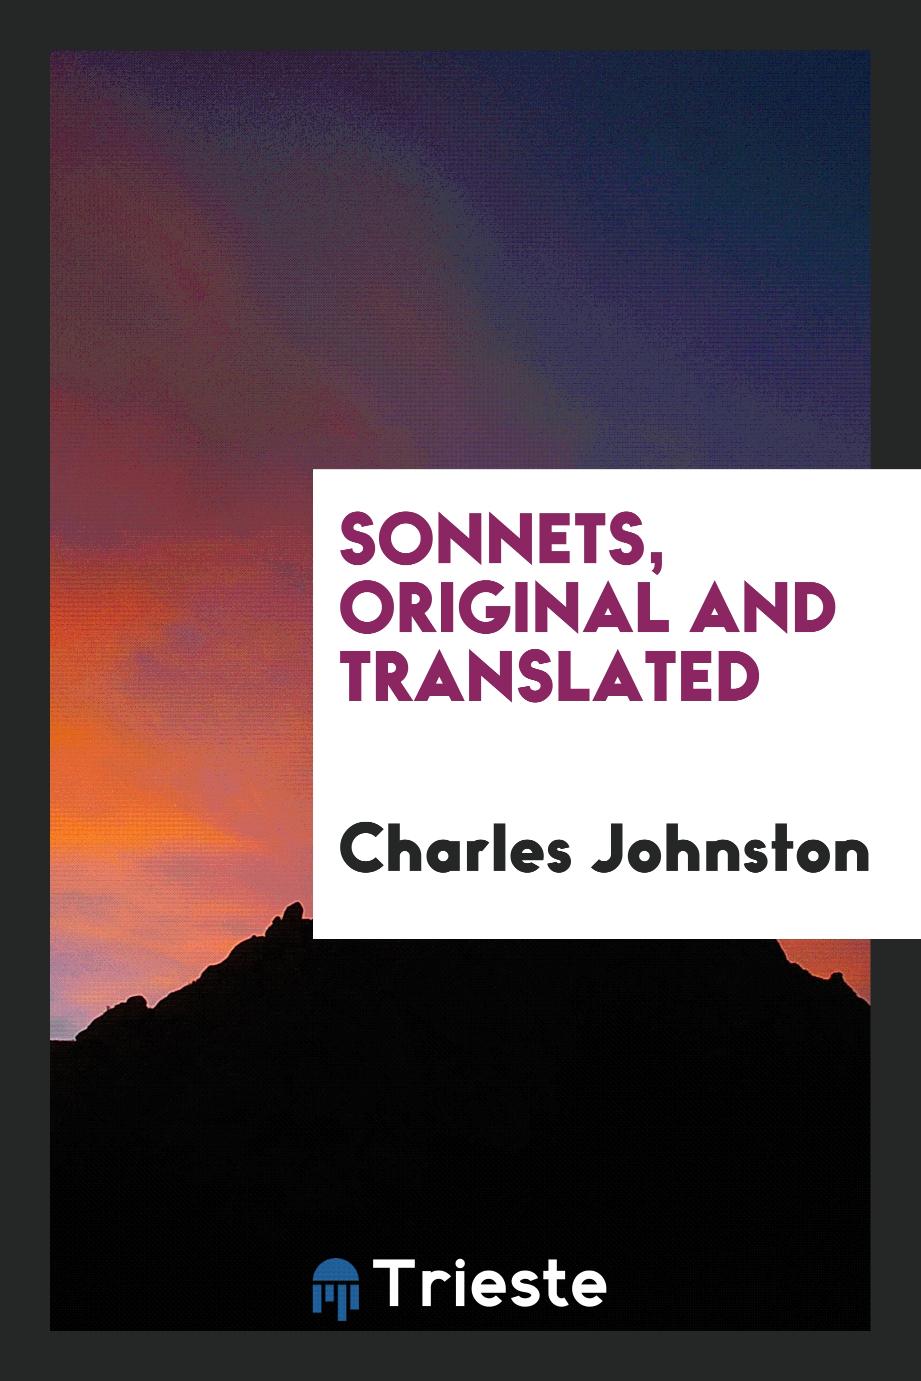 Sonnets, original and translated